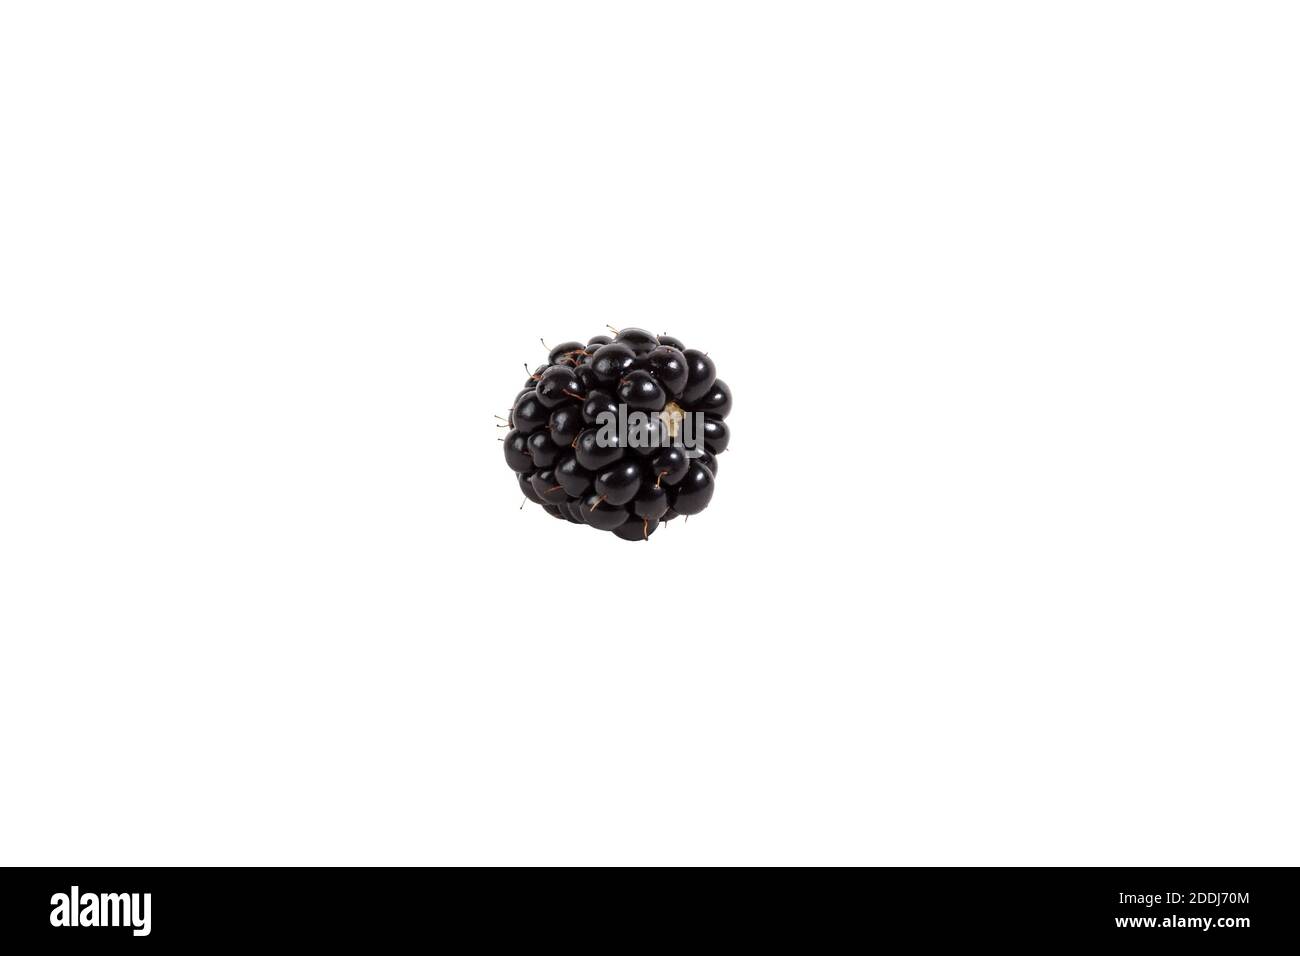 Ripe garden blackberry berry on a white isolated background Stock Photo